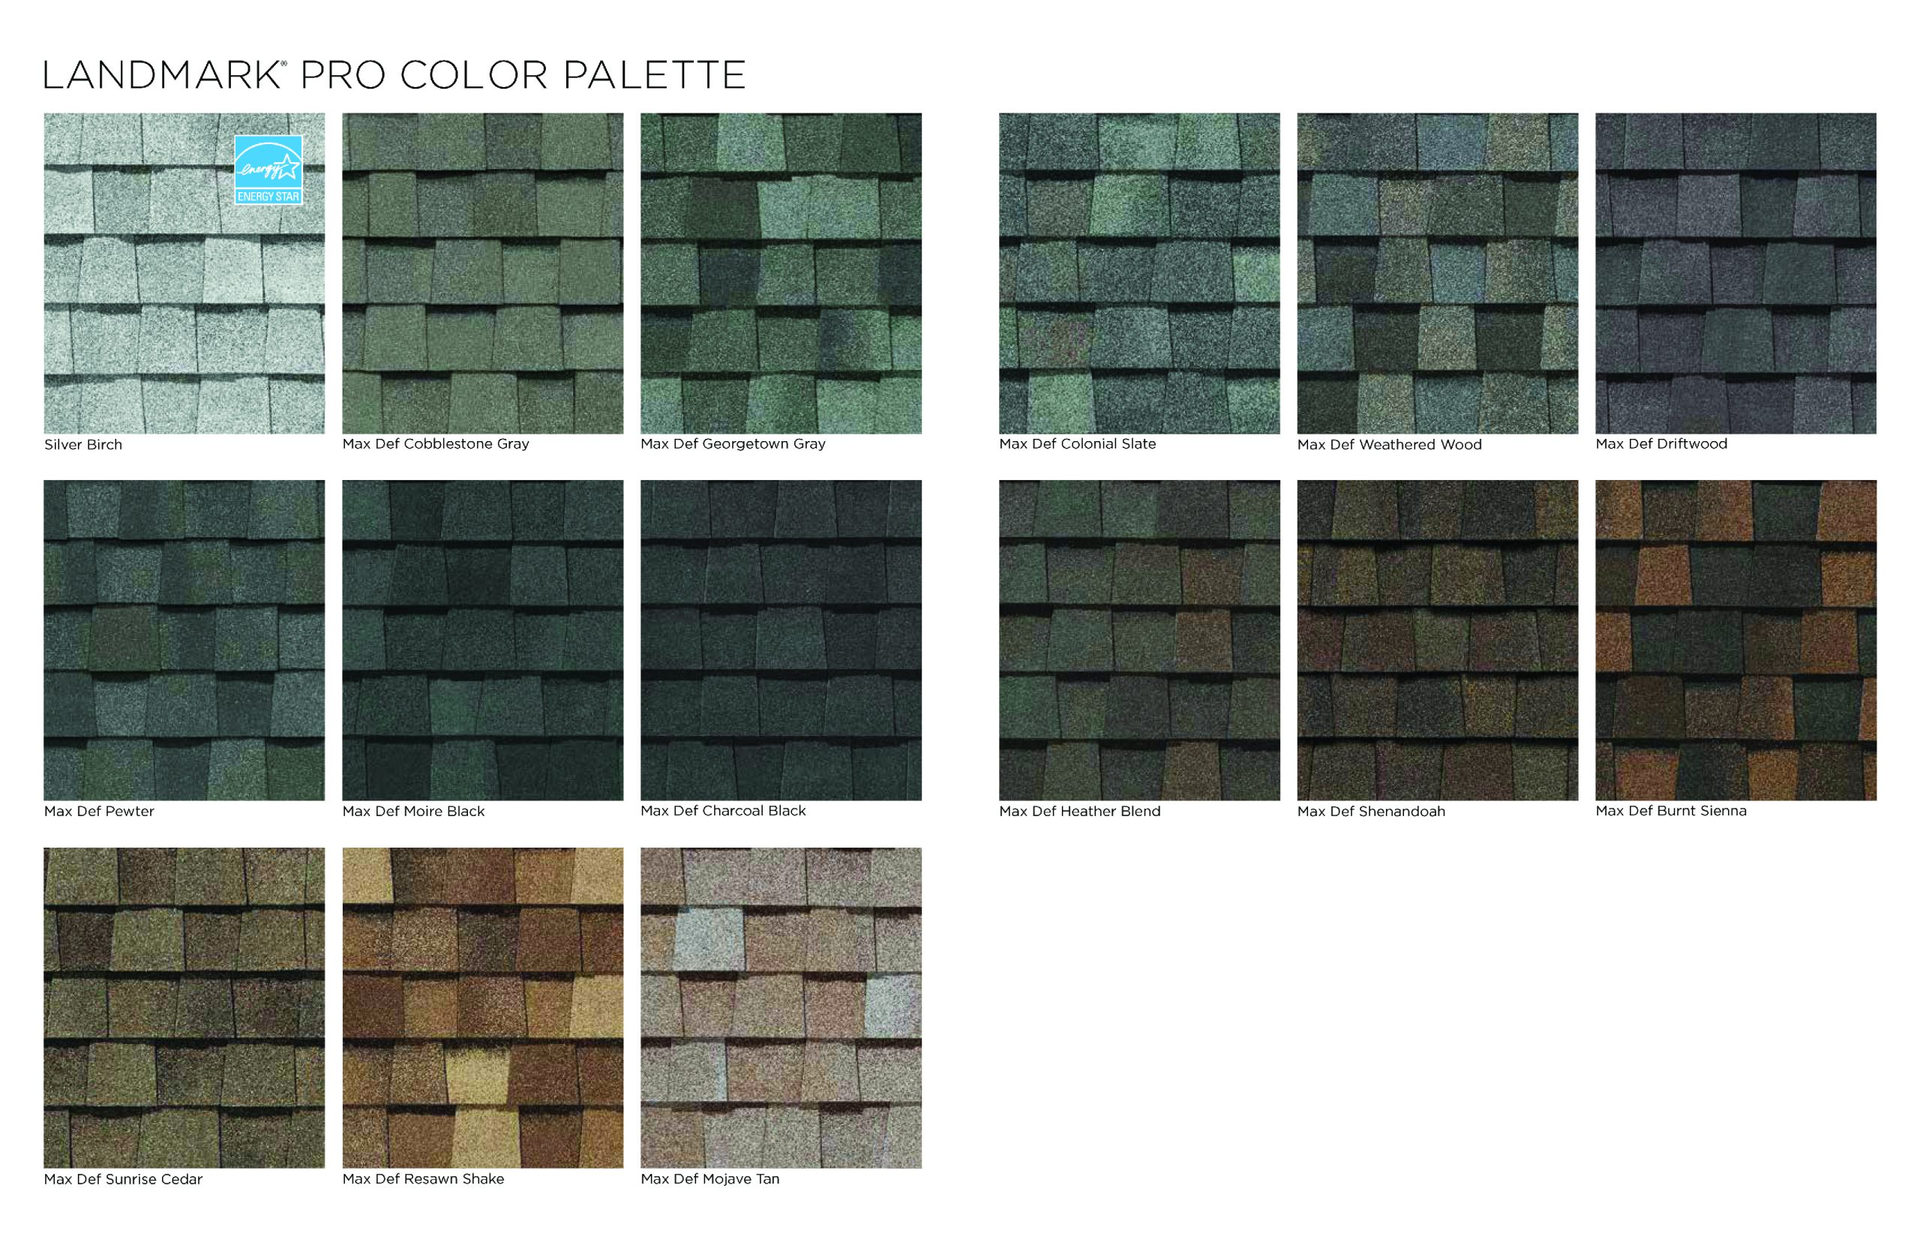 a landmark pro color palette shows different shades of shingles